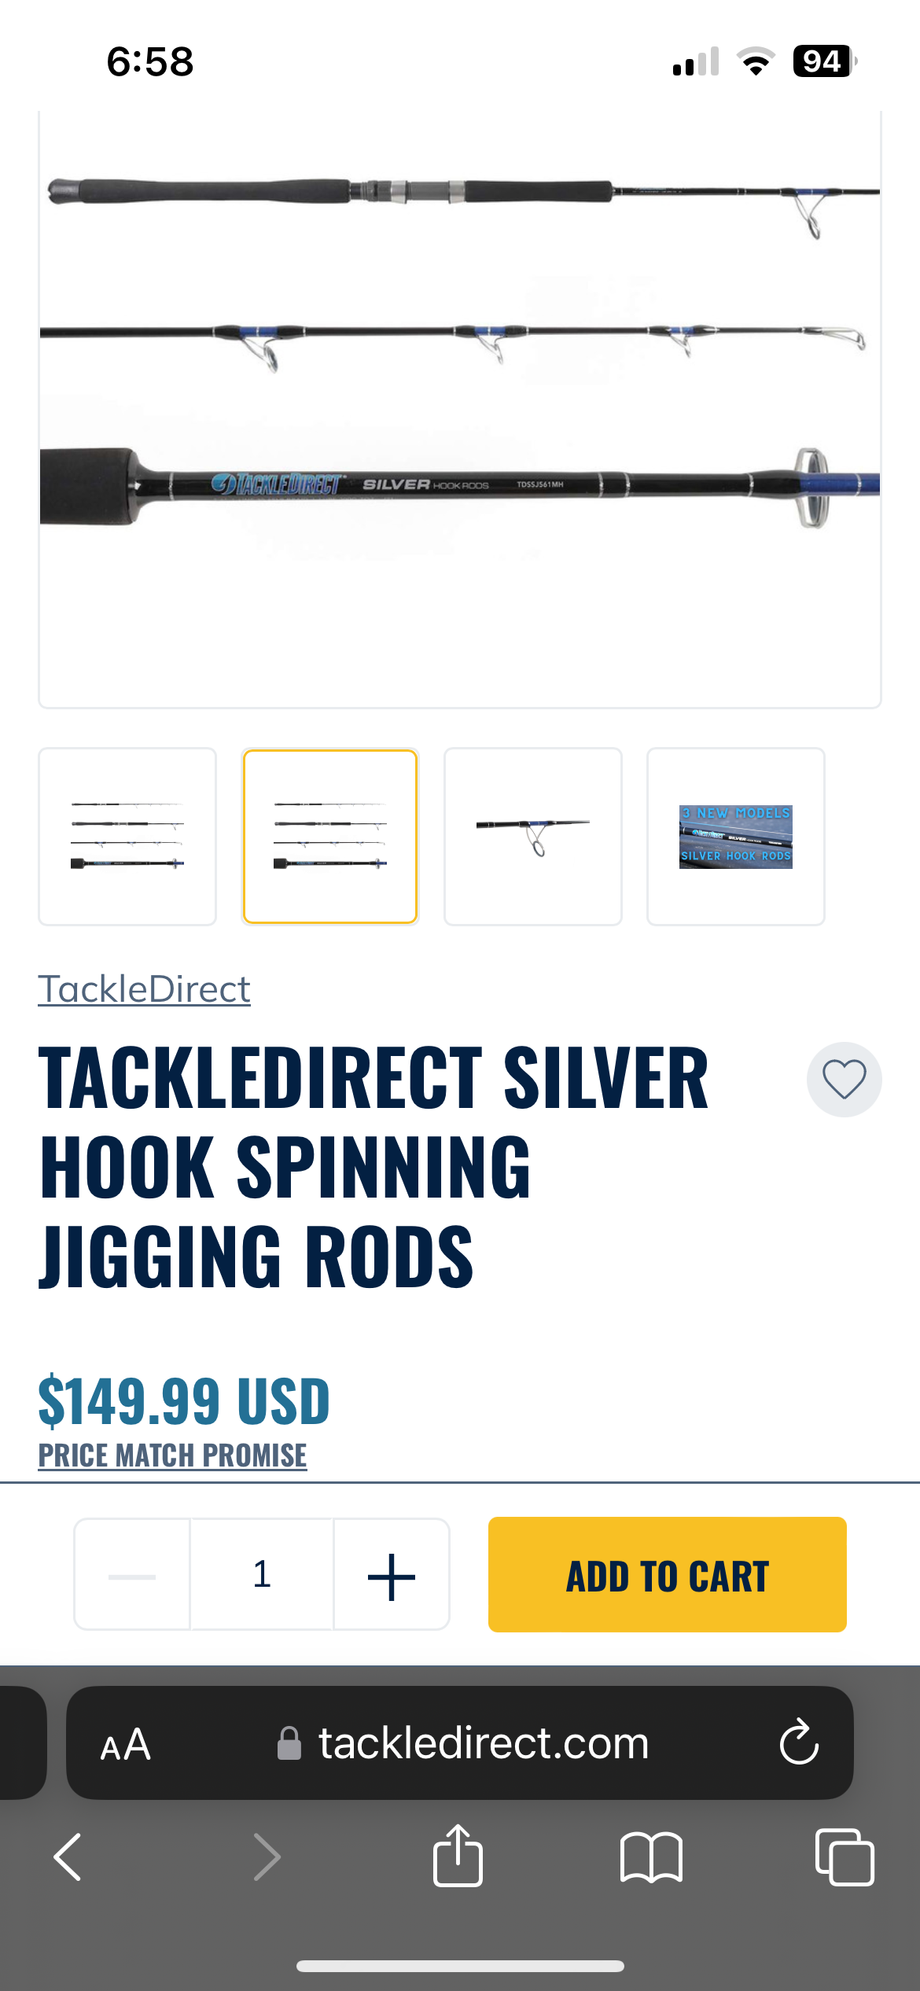 TackleDirect Silver Hook Spin Jigging Rods (Pair) - The Hull Truth -  Boating and Fishing Forum